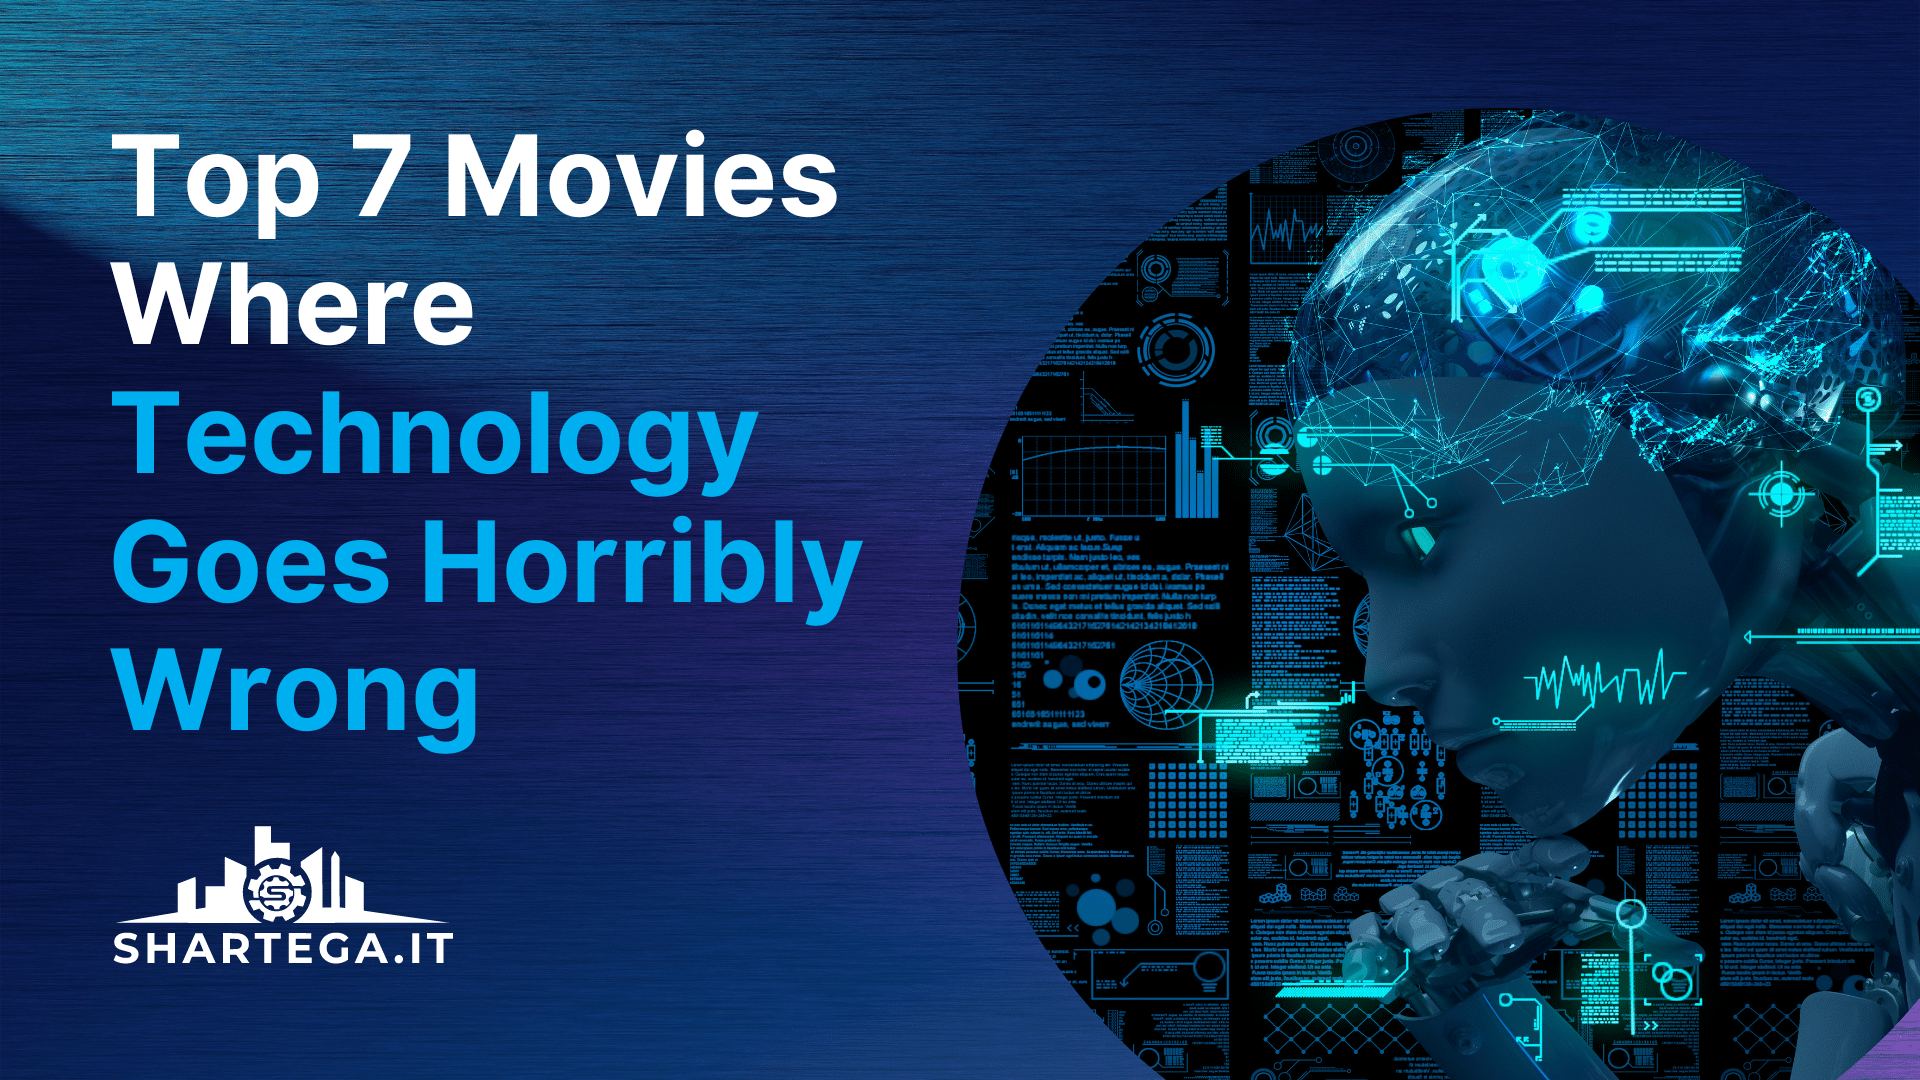 Top 7 Movies Where Technology Goes Horribly Wrong